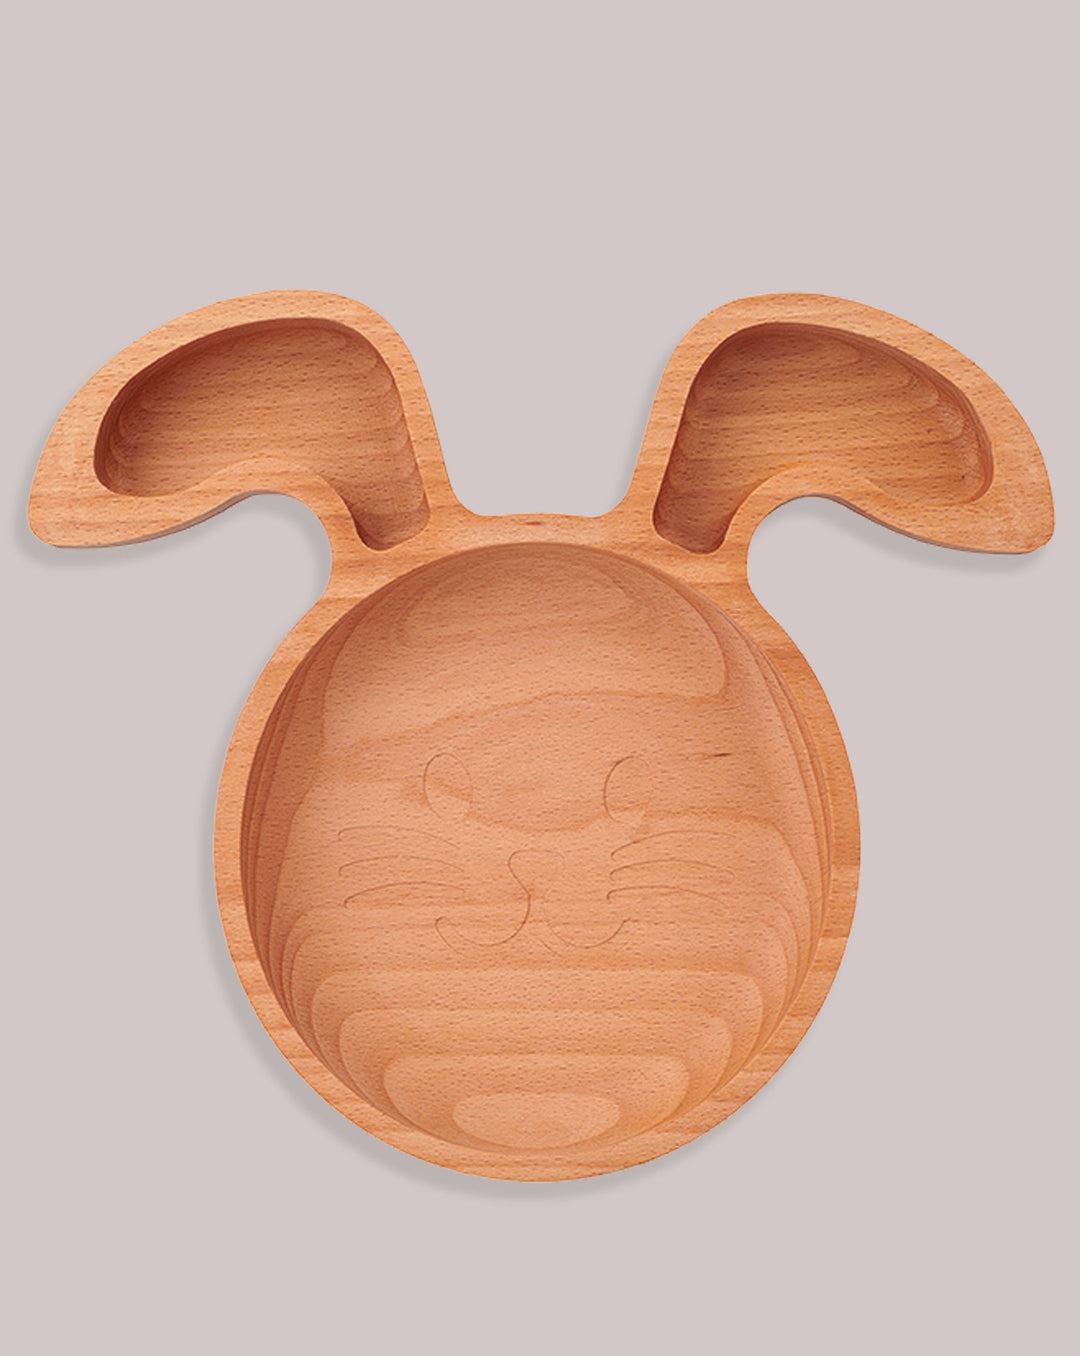 THE WOOD LIFE PROJECT CHILDREN WOODEN PLATE The Rabbit Plate The Rabbit Plate | For Kids & Toddlers | 3133